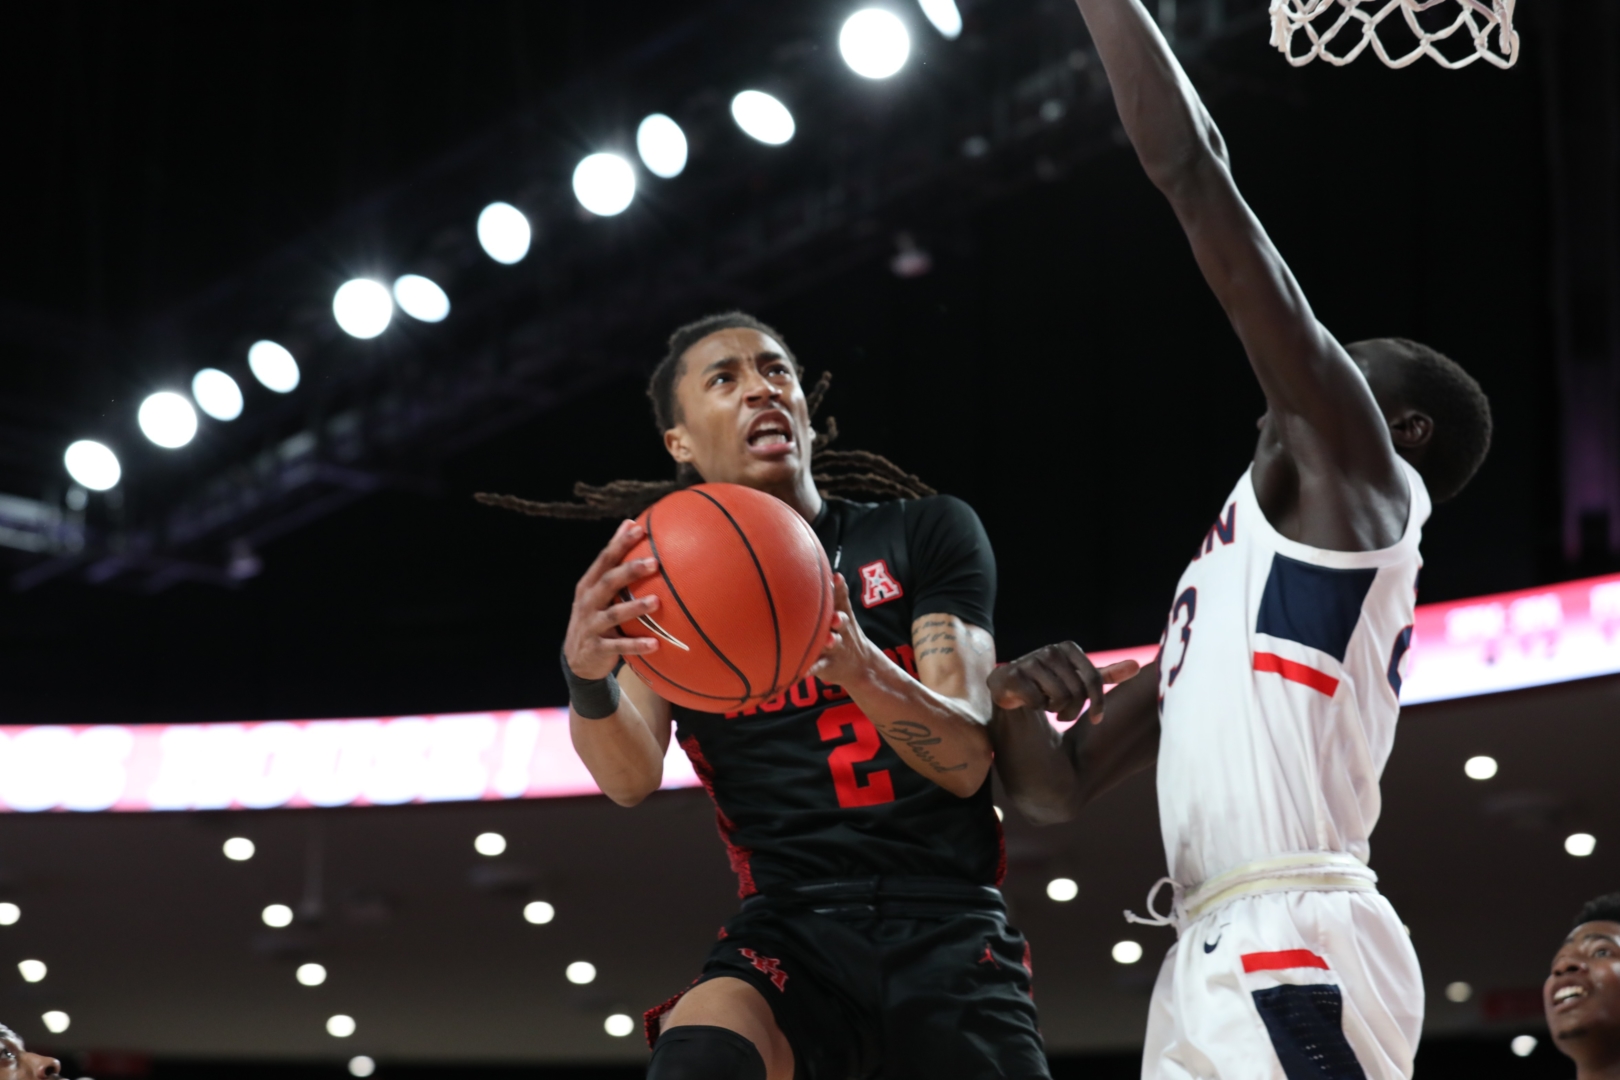 High expectations have been placed on sophomore guard Caleb Mills who was named the 2020 AAC Preseason Player of the Year | Mikol Kindle Jr./The Cougar